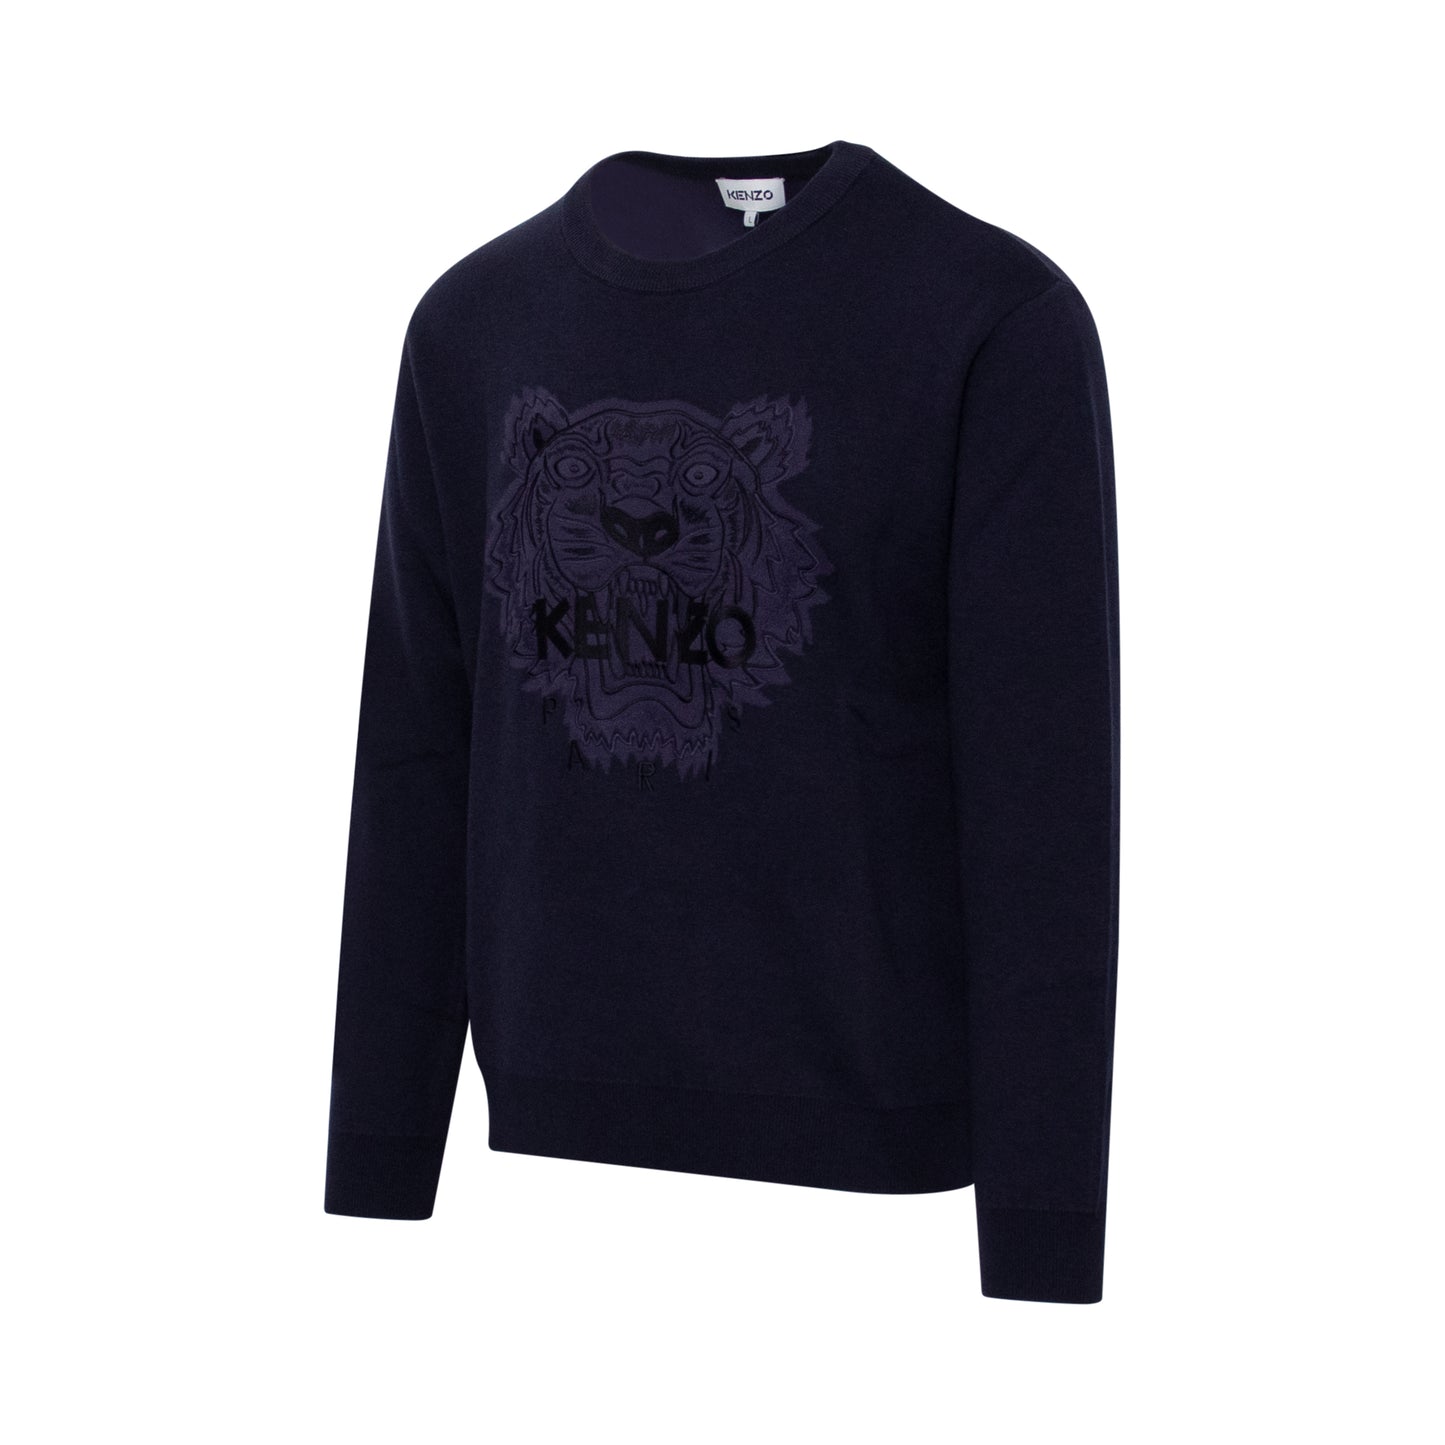 Kenzo Classic Tiger Jumper in Navy Blue